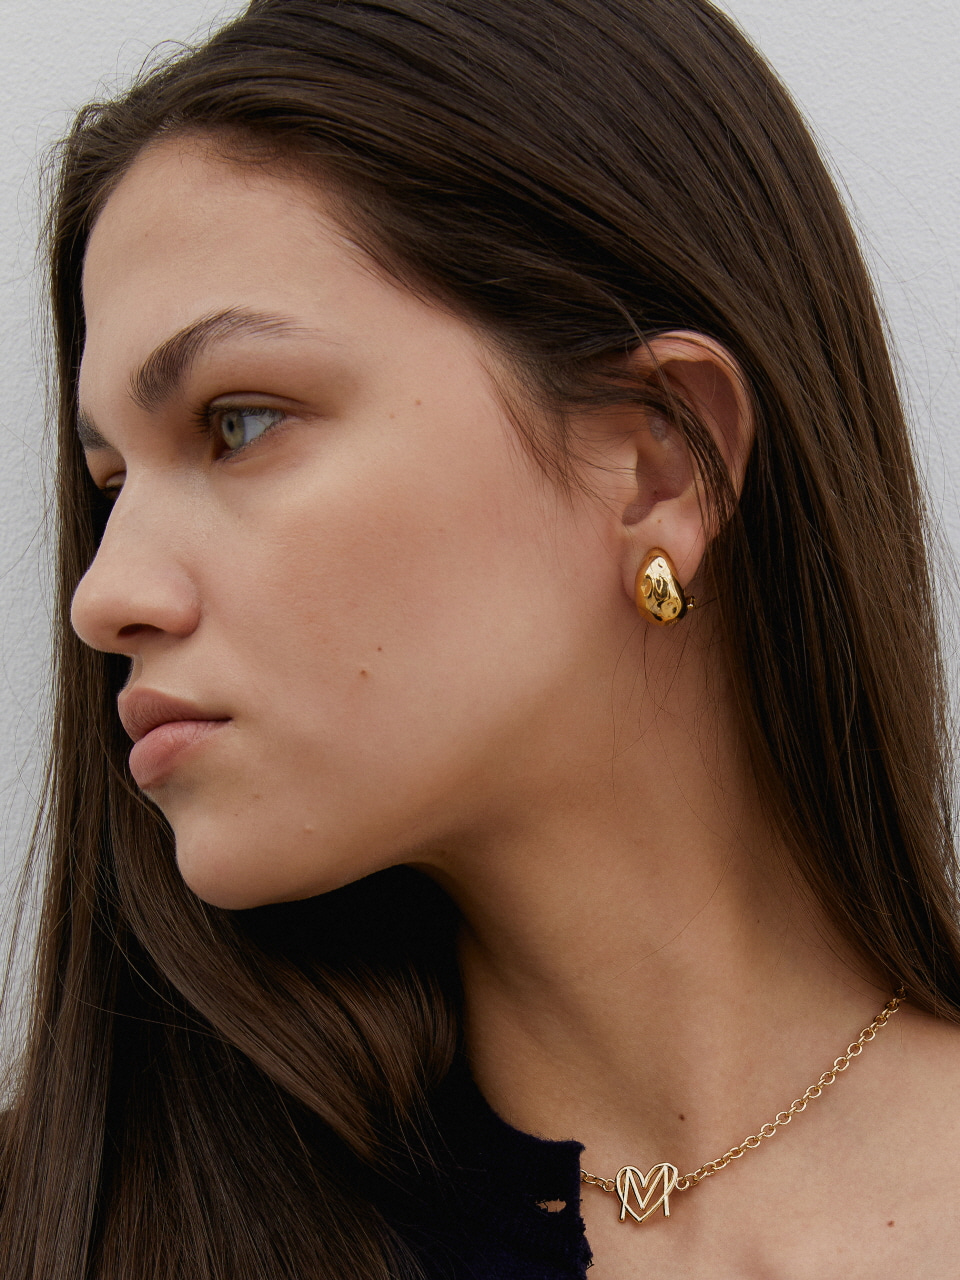 [delivery 3.30] bumpy dewy earring - gold